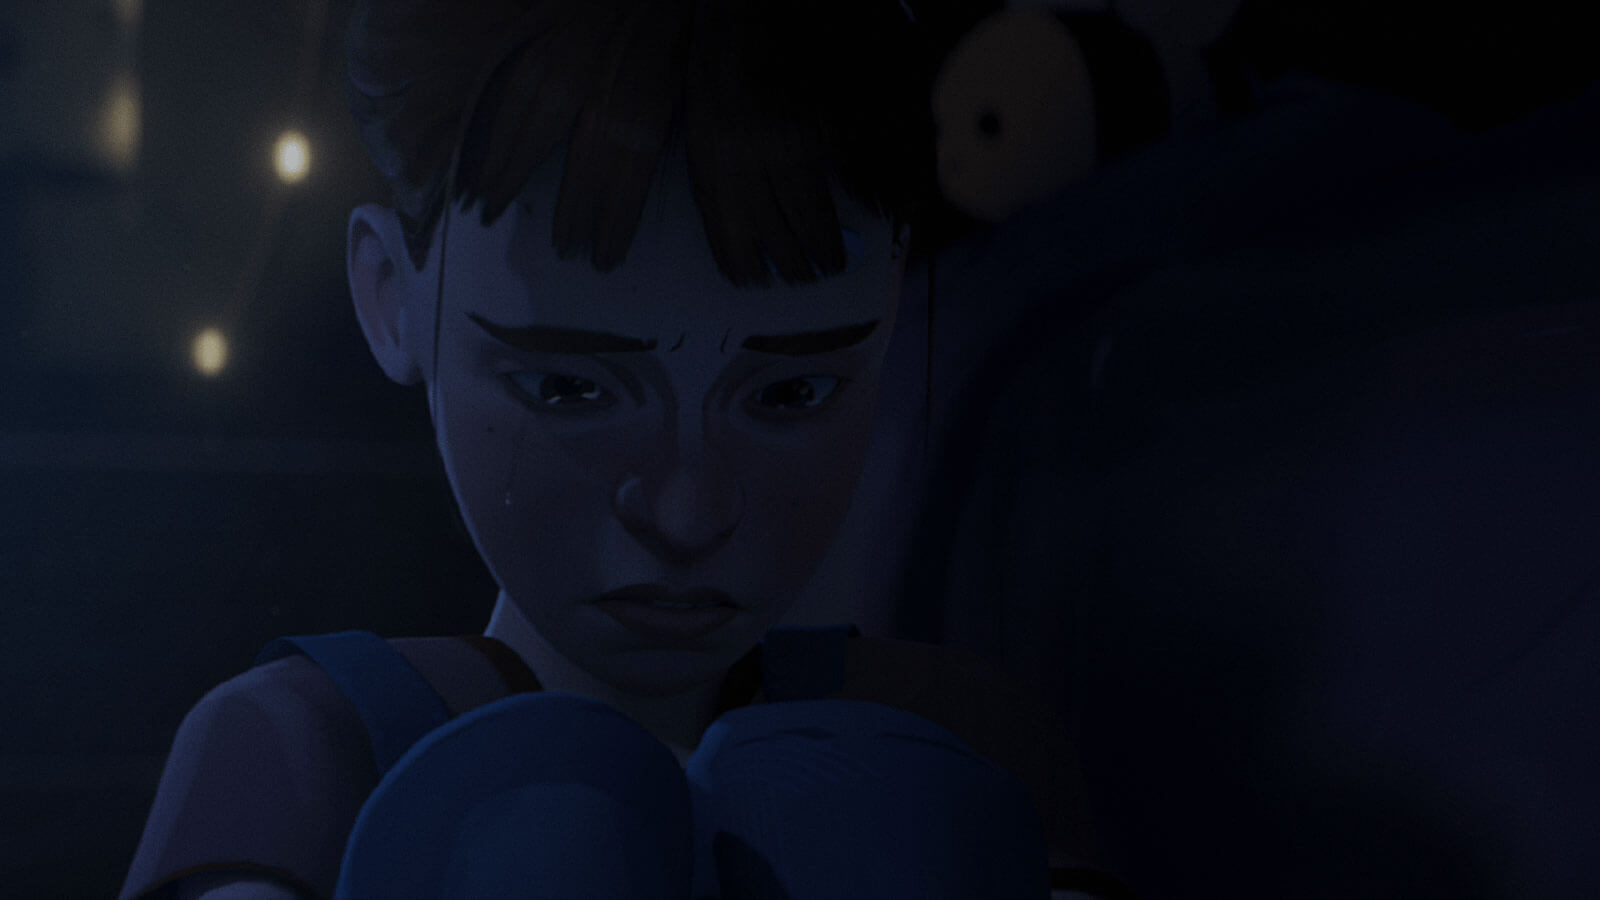 Close-up of a girl crouched and crying at night.